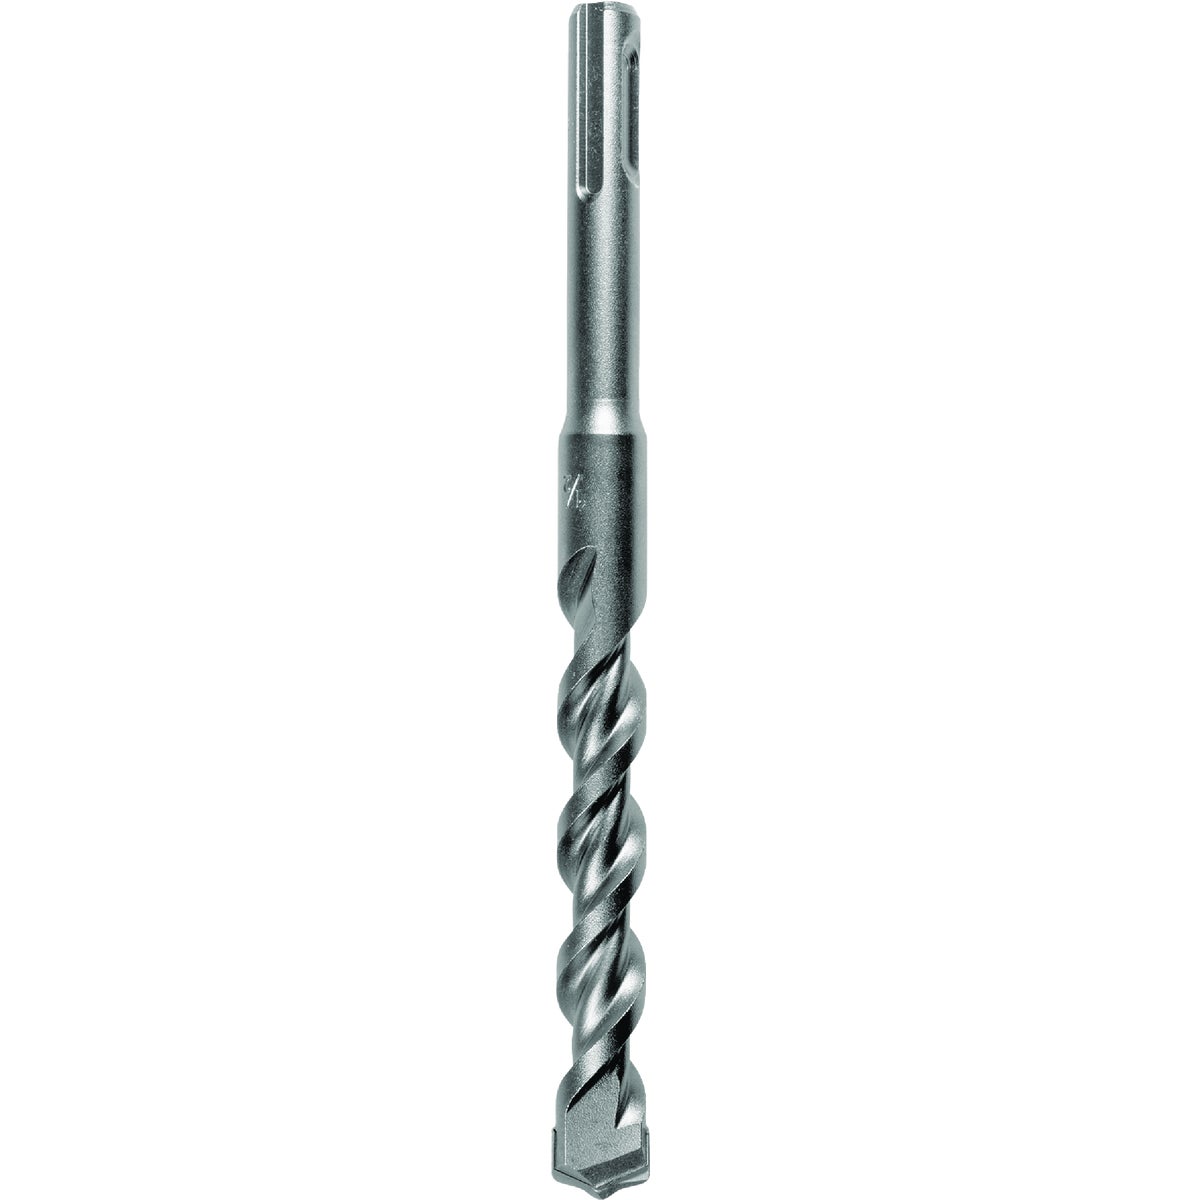 Simpson Strong-Tie 3/8 In. x 6-1/4 In. SDS-Plus Rotary Hammer Drill Bit